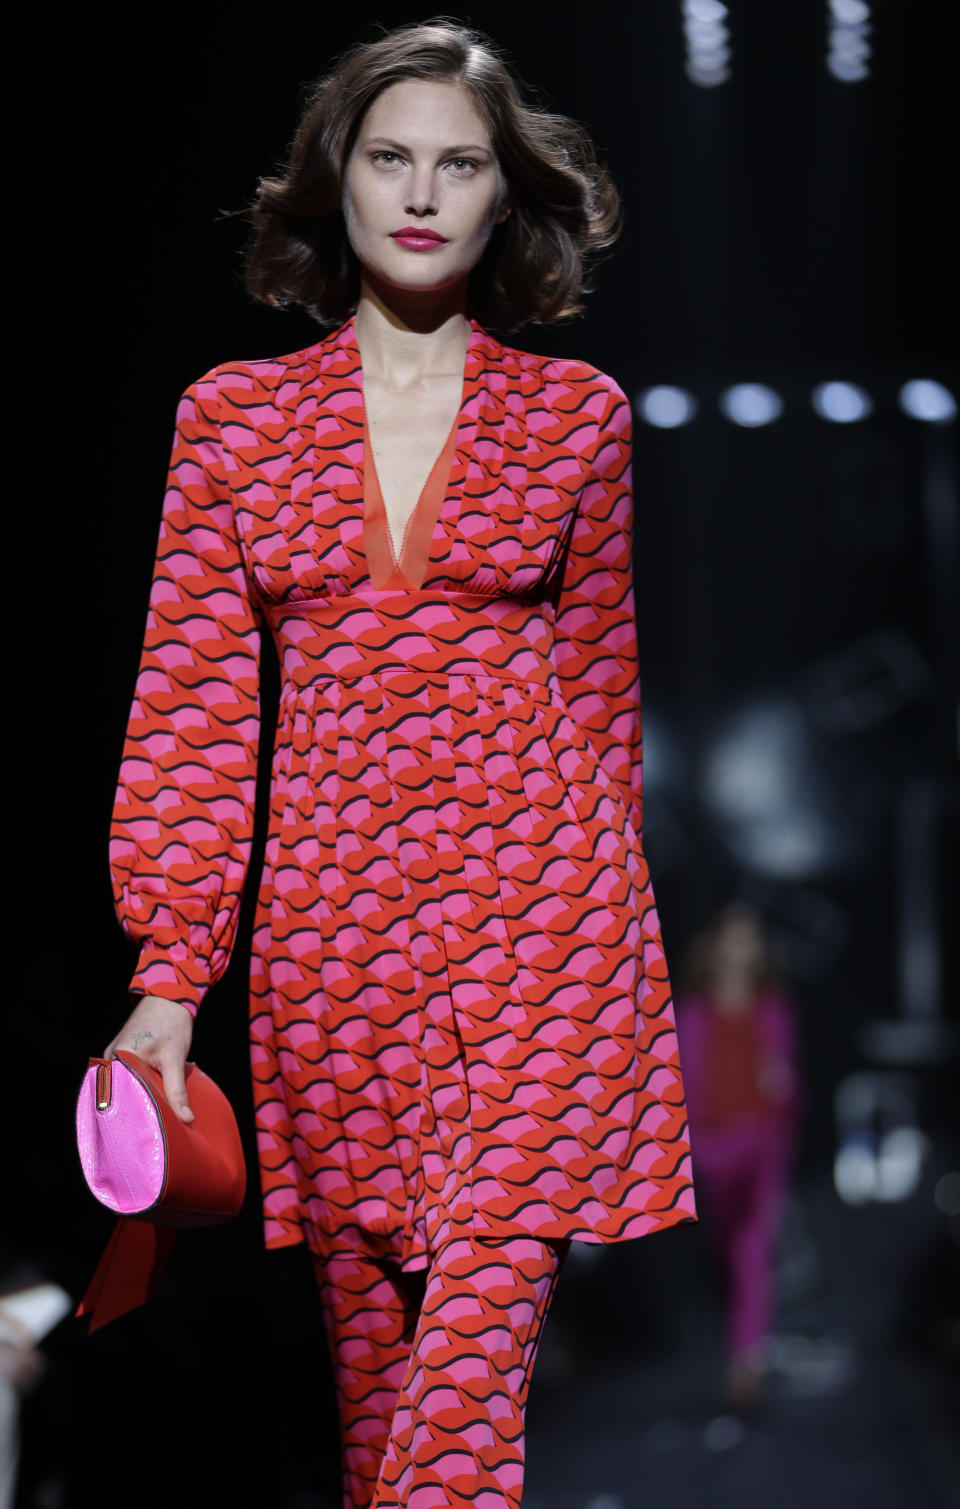 The Diane von Furstenberg Fall 2013 collection is modeled during Fashion Week in New York, Sunday, Feb. 10, 2013. (AP Photo/Seth Wenig)